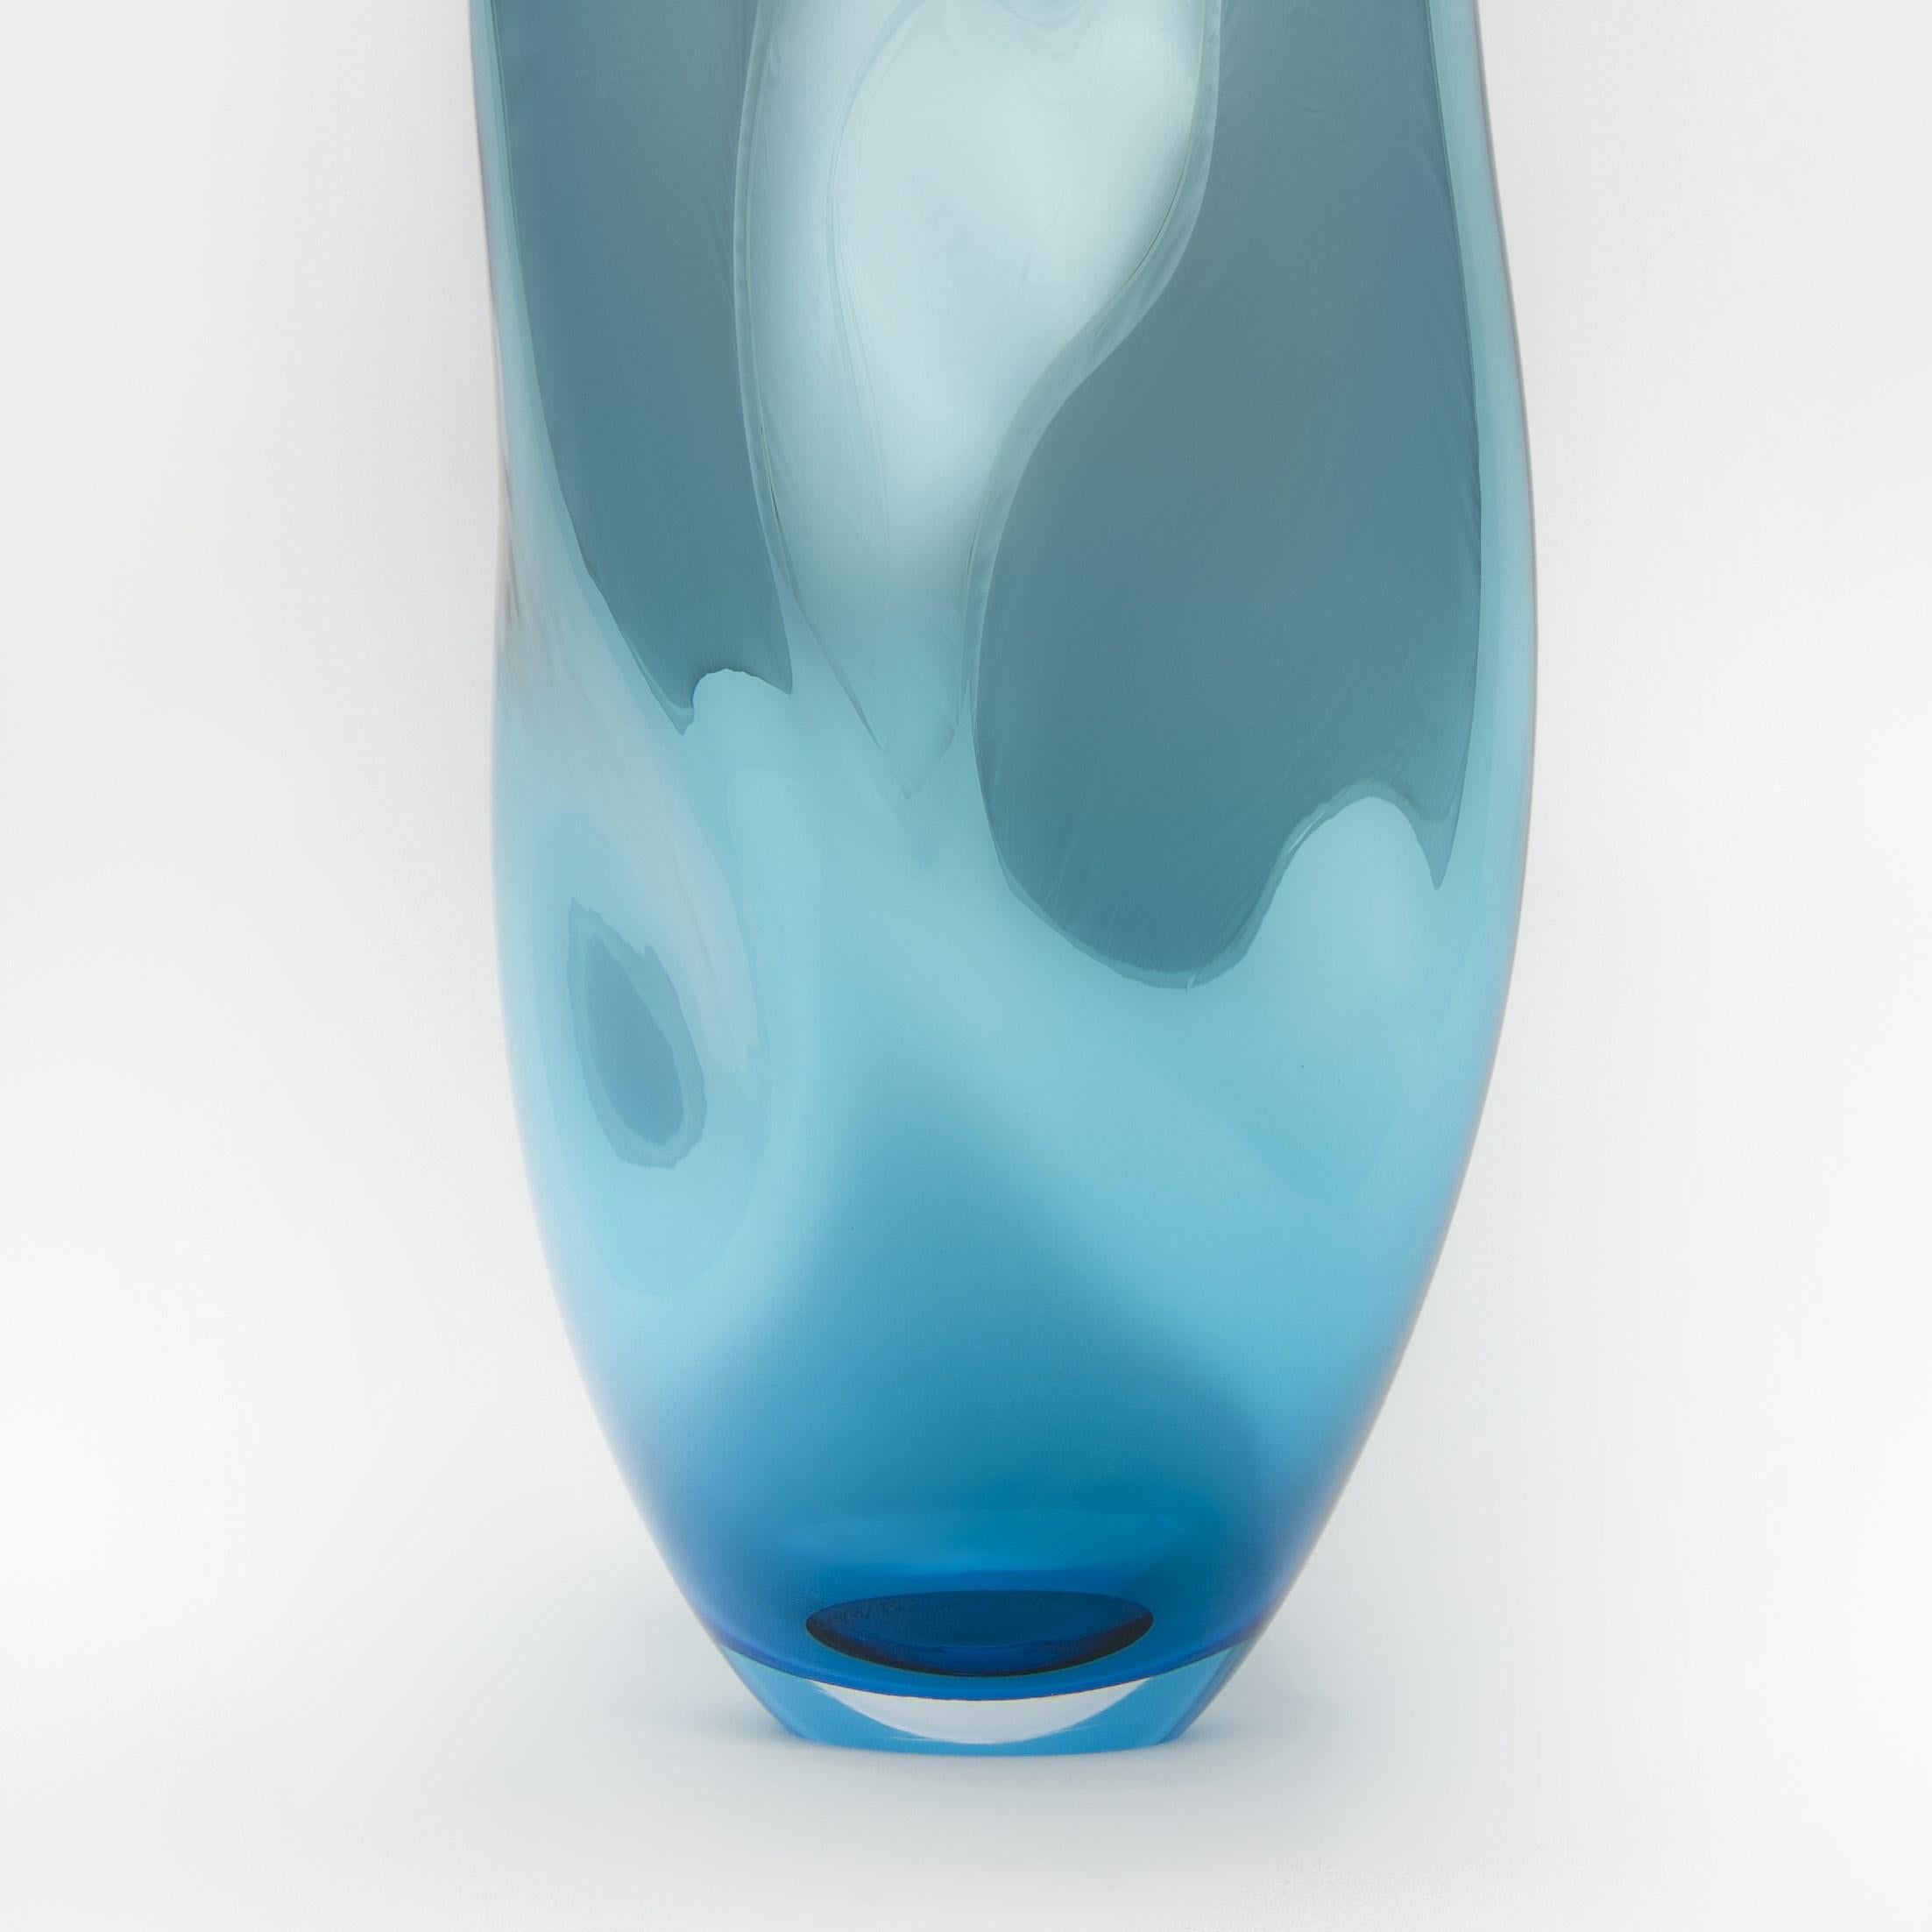 British Glass v Metal in Turquoise, an Aqua Reflective Glass Sculpture by Liam Reeves